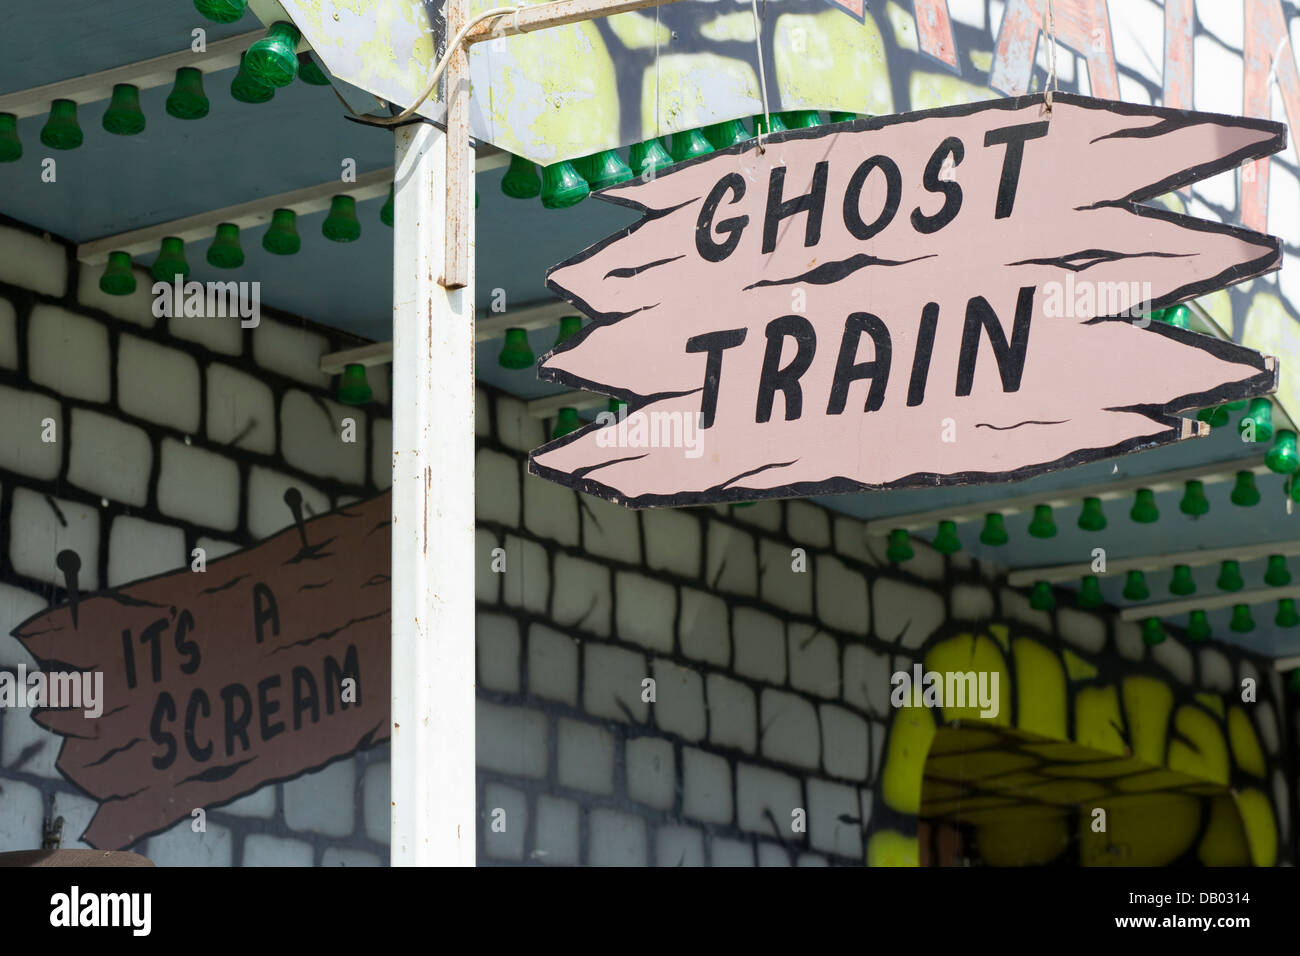 The Ghost train at a fairground Stock Photo